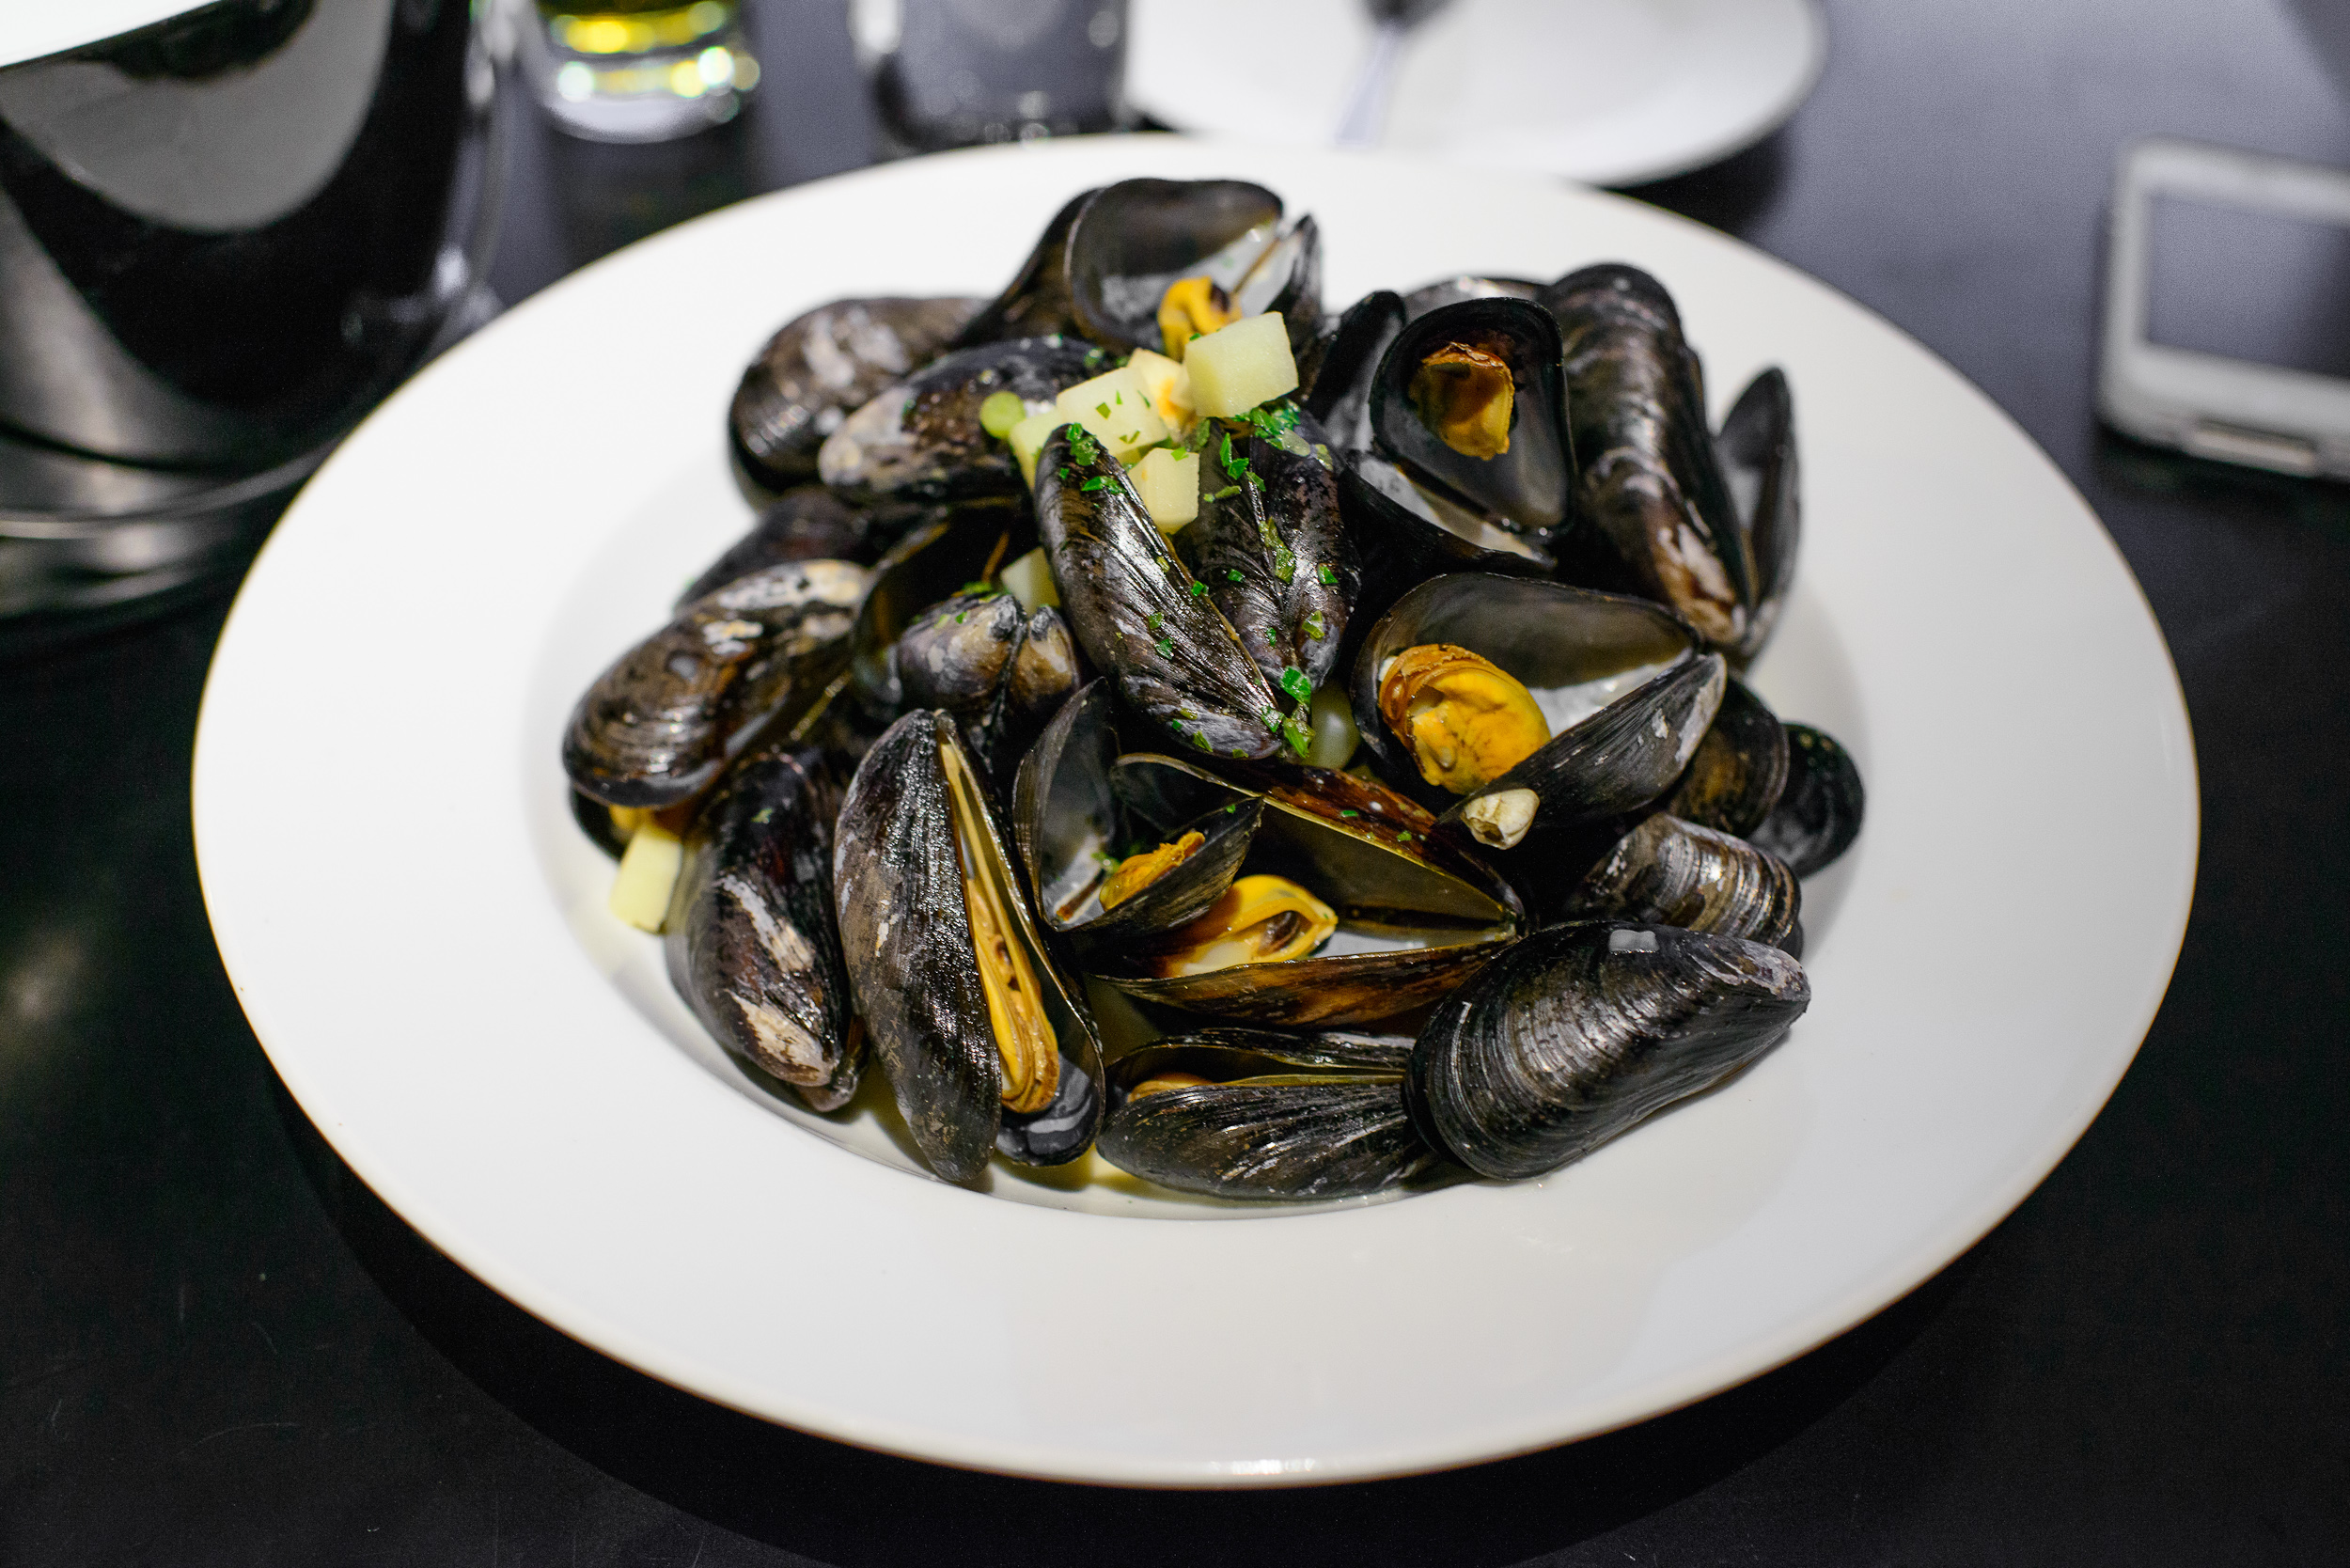 Blue mussels from Limfjorden steamed in apple cider with plenty